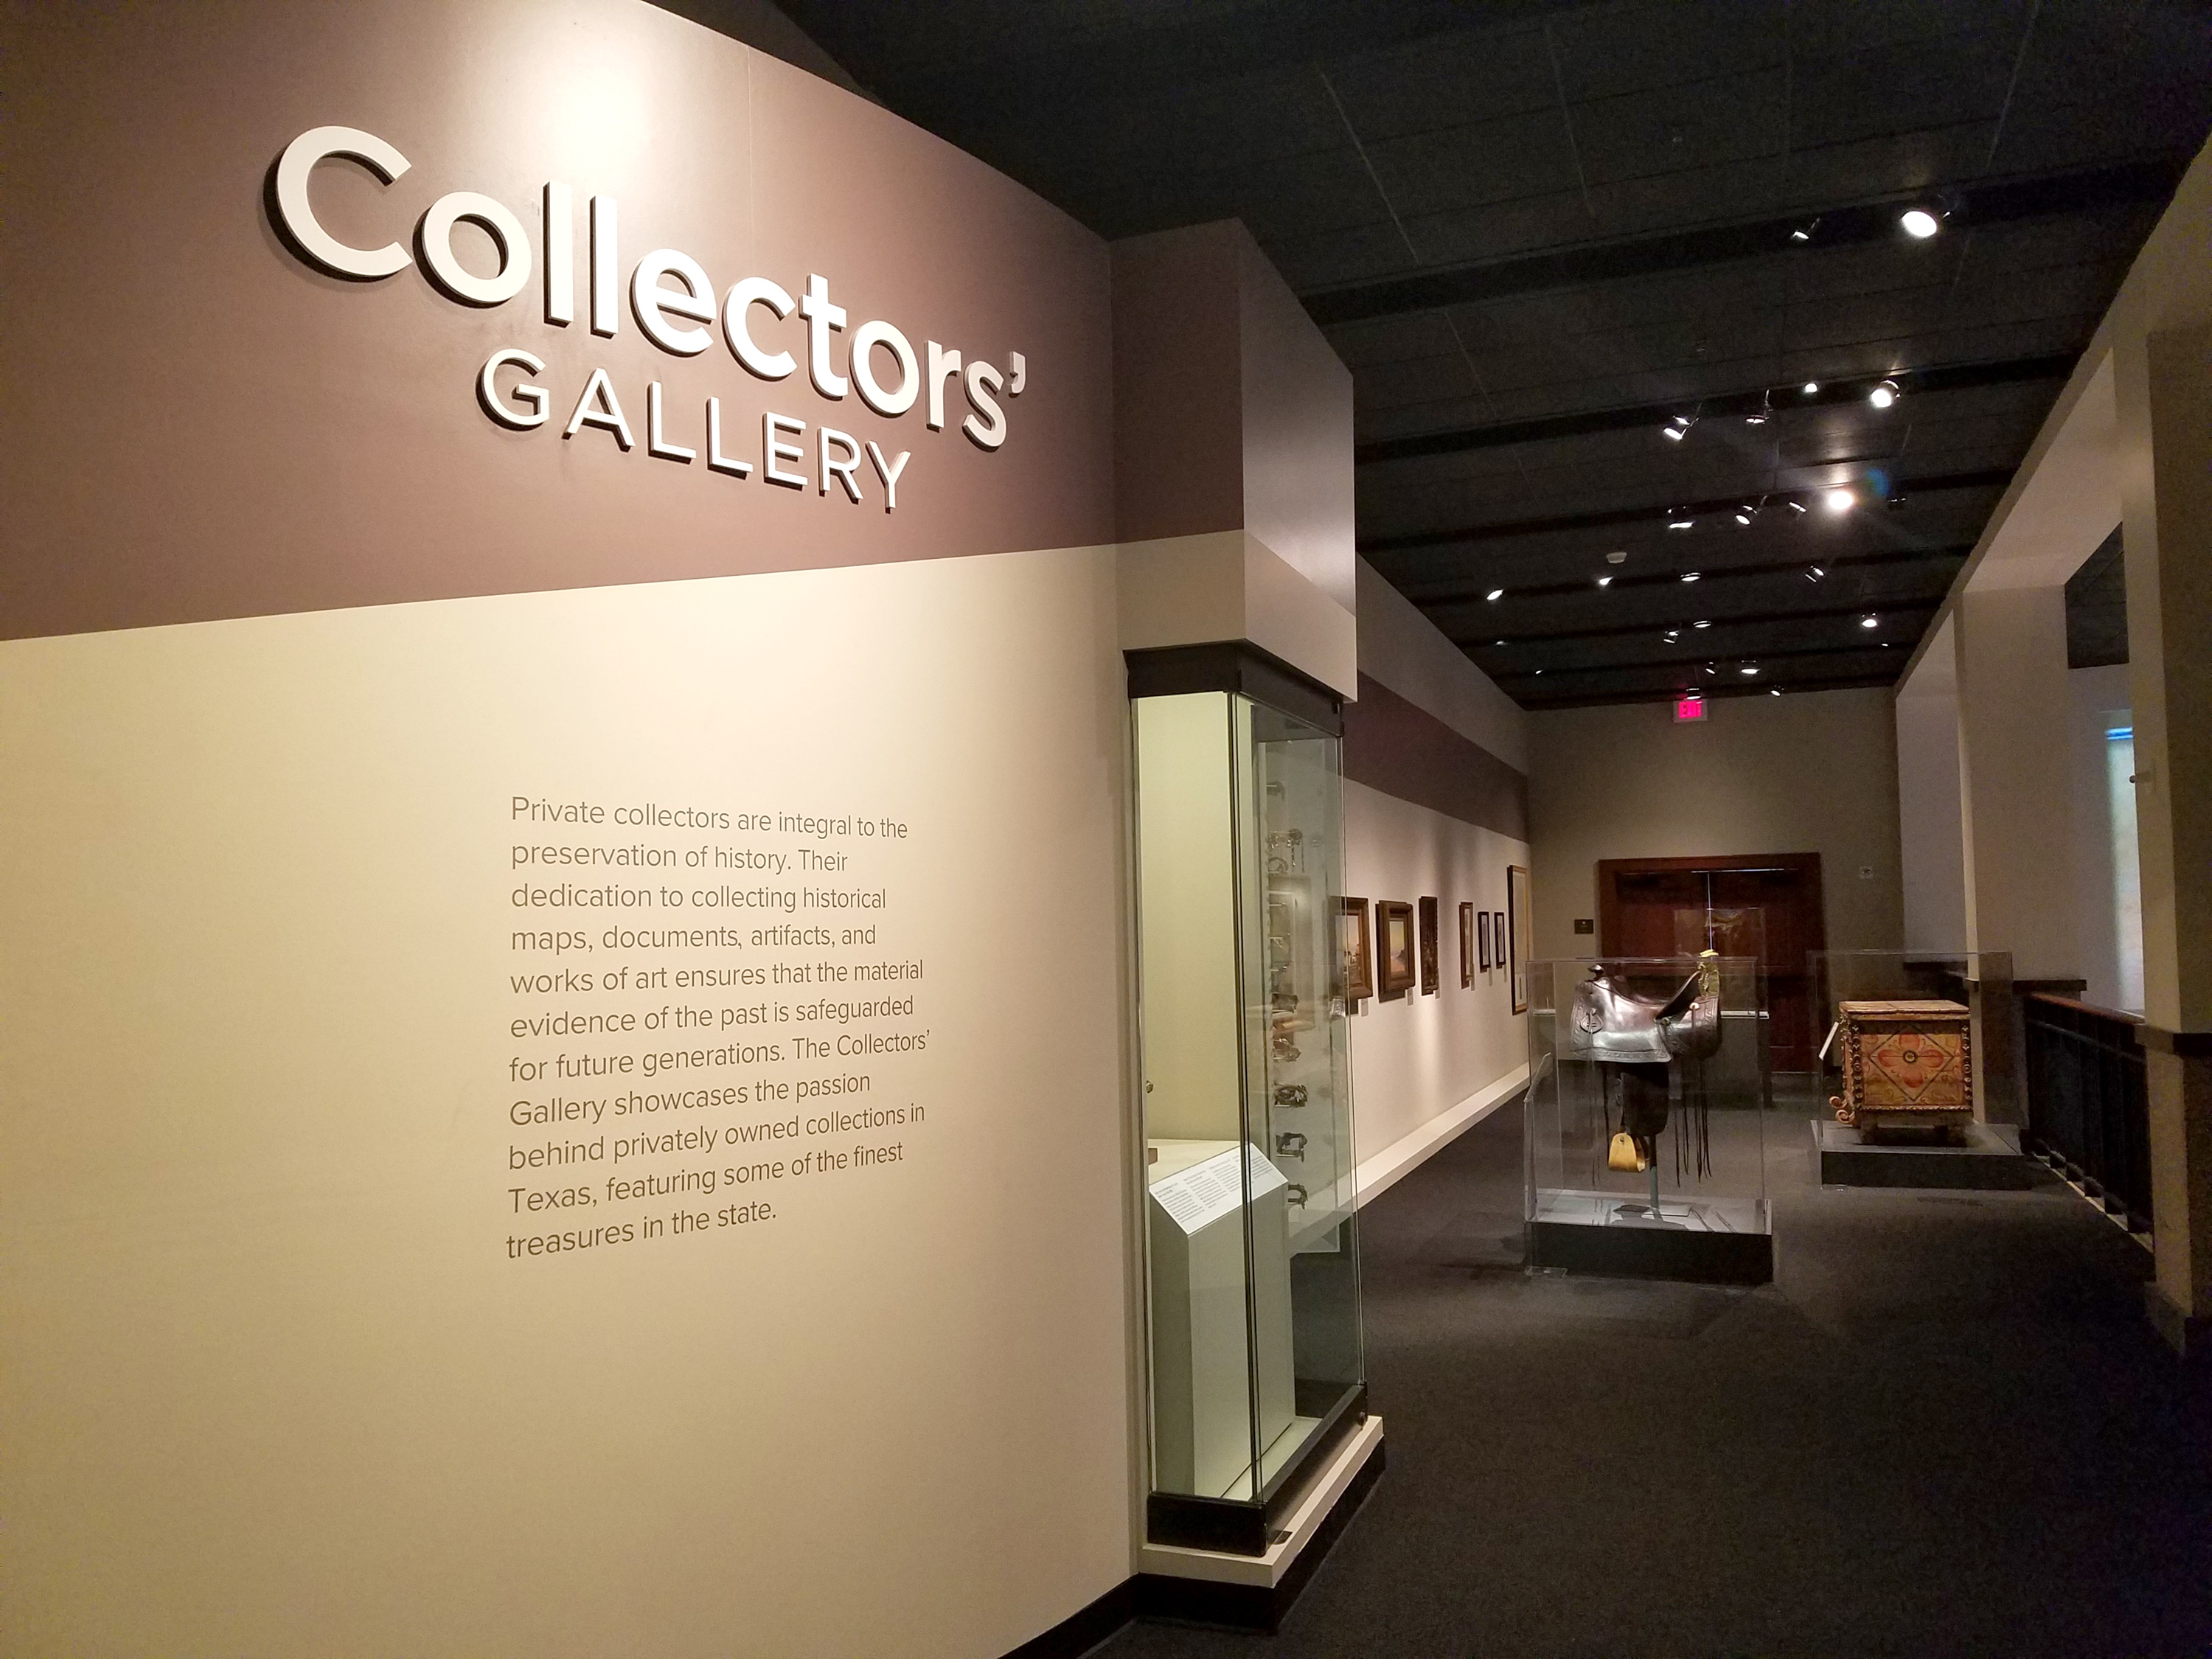 The Bullock Museum opened a new Collectors' Gallery this month that will feature rotating special exhibitions highlighting private history collections in Texas.